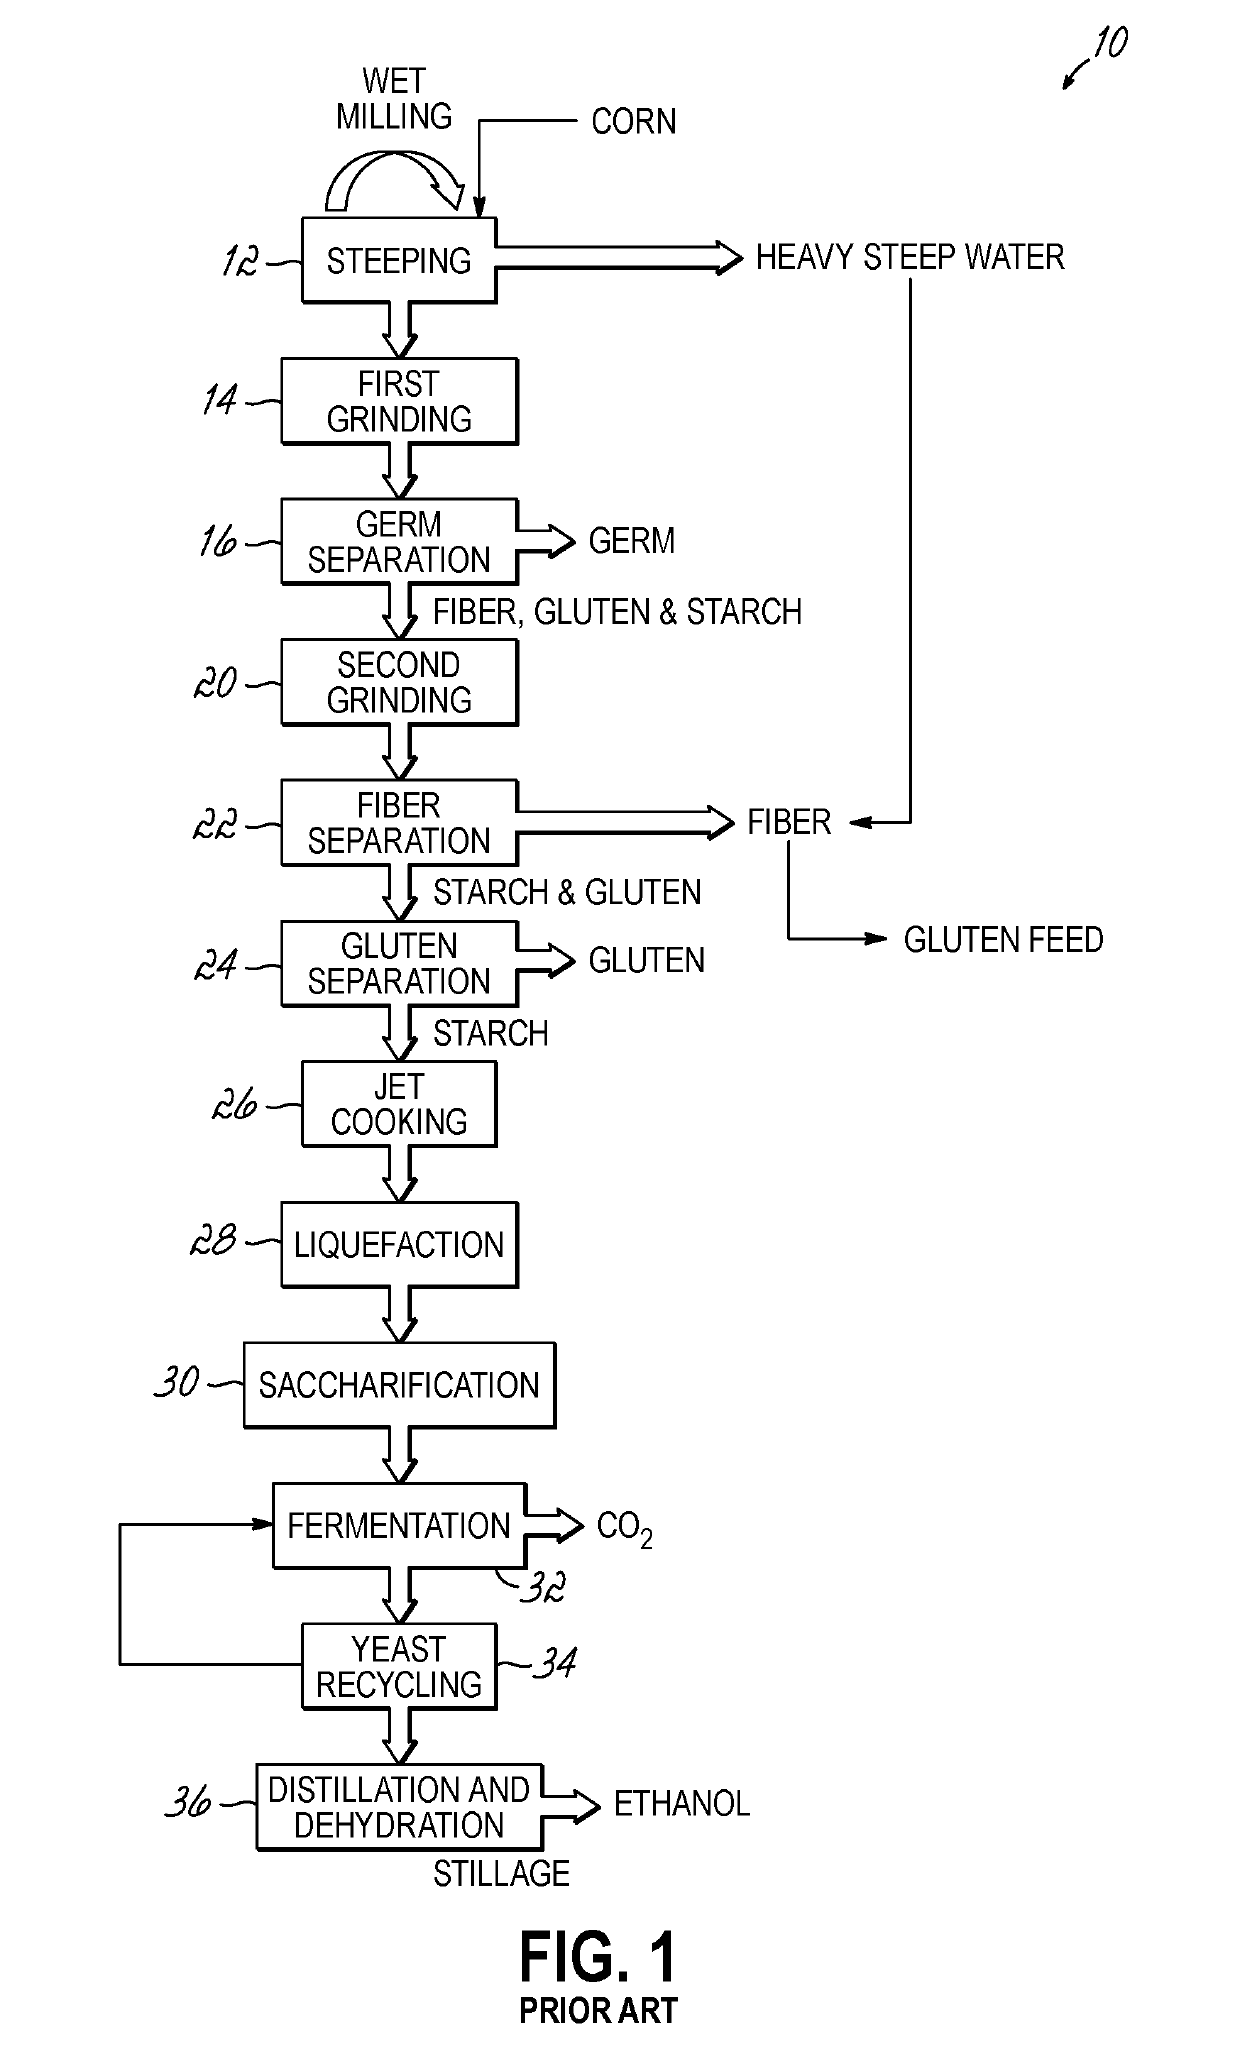 System and method for producing a sugar stream with front end oil separation